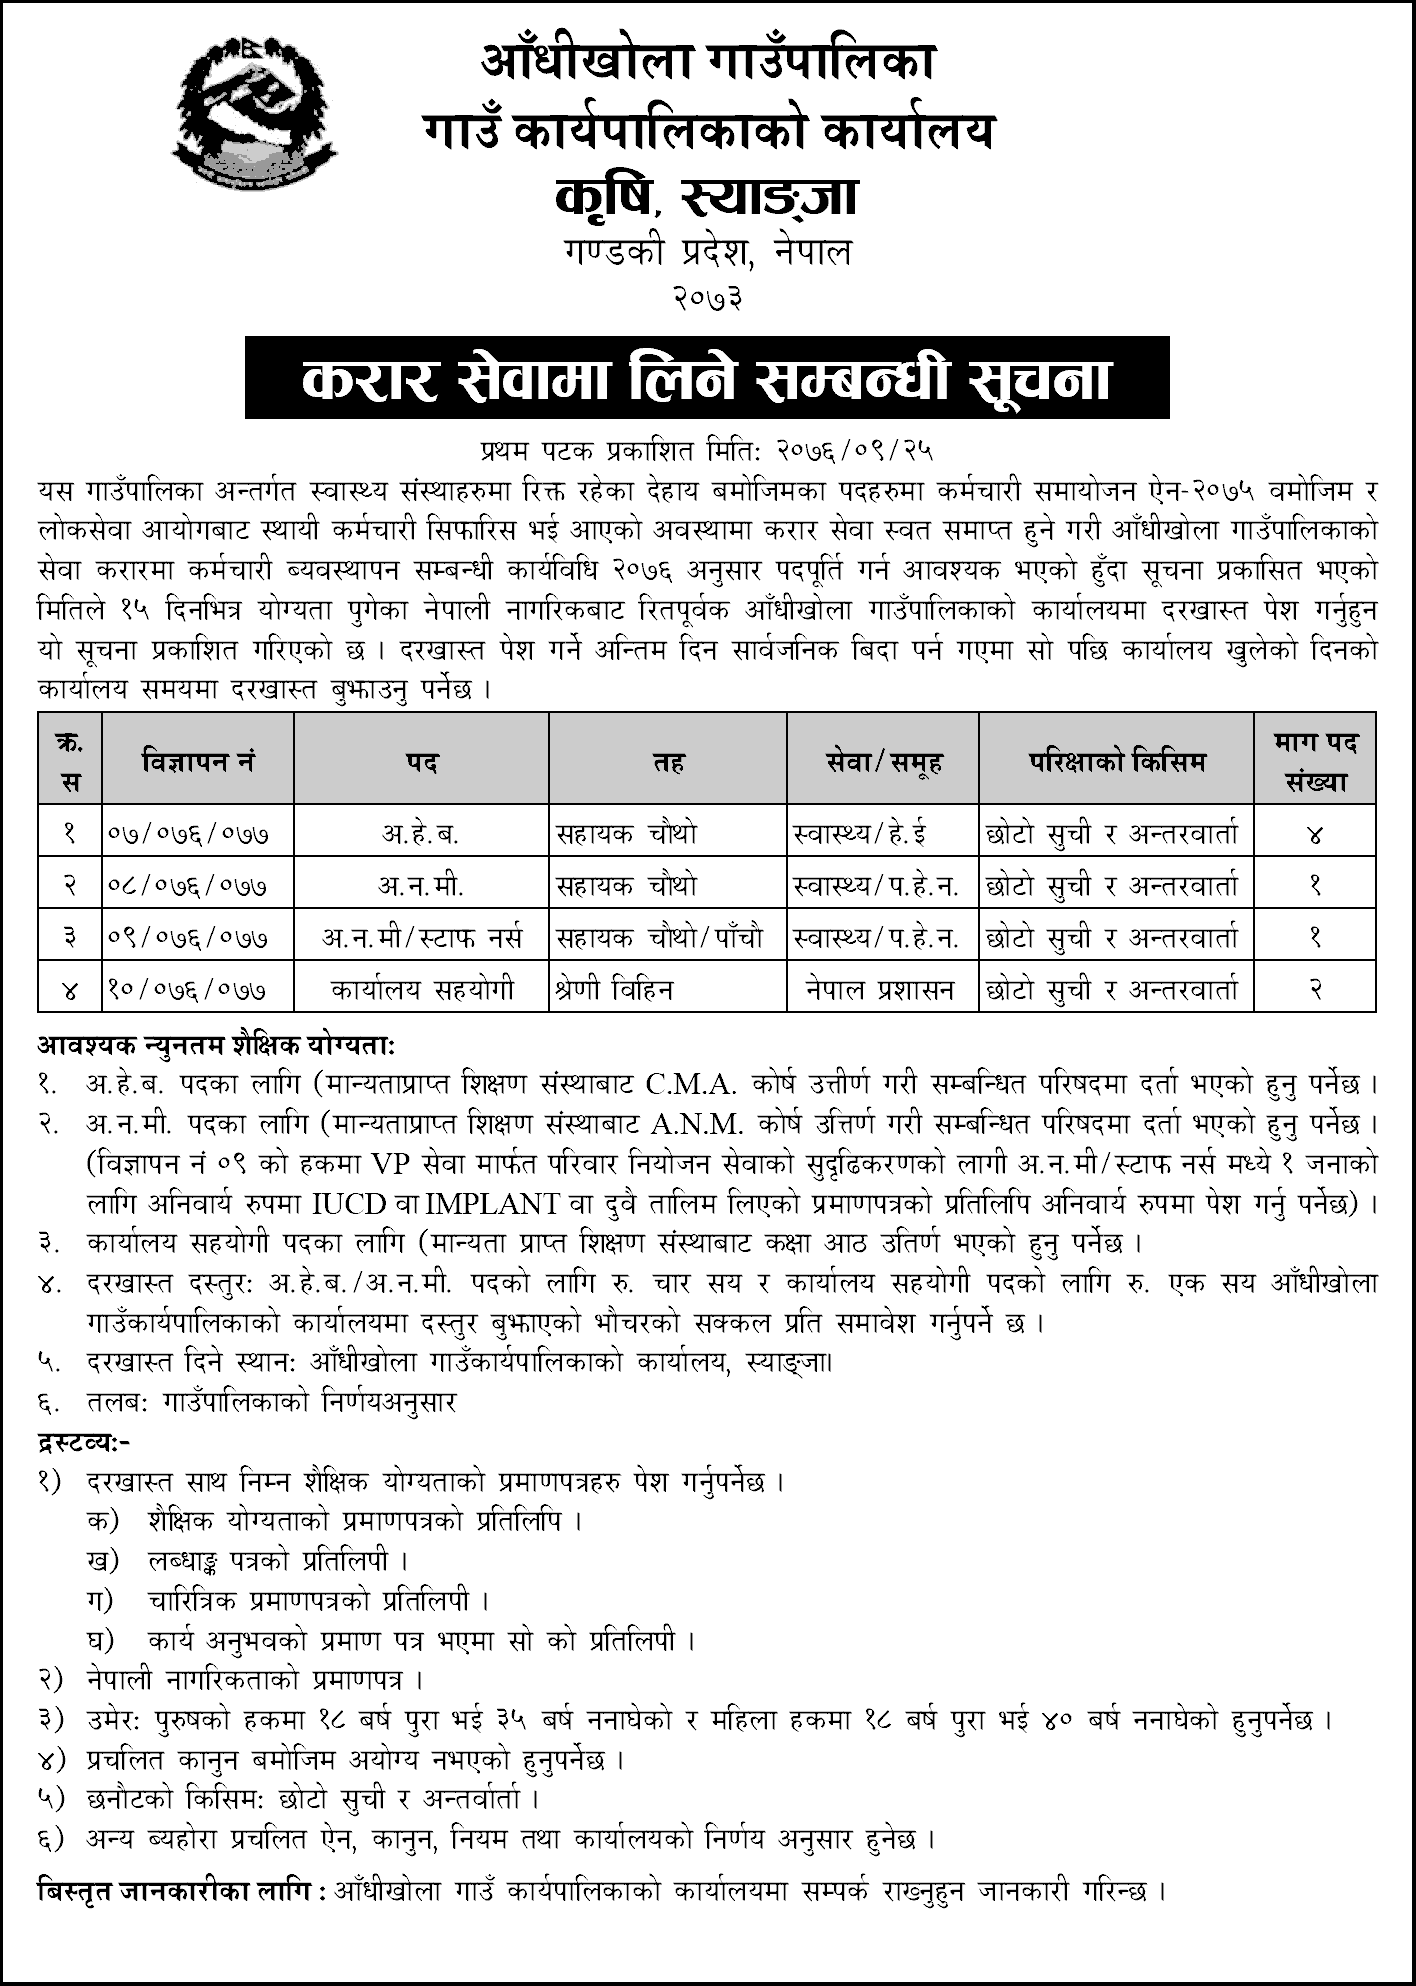 Aandhikhola Rural Municipality Vacancy for Health Services